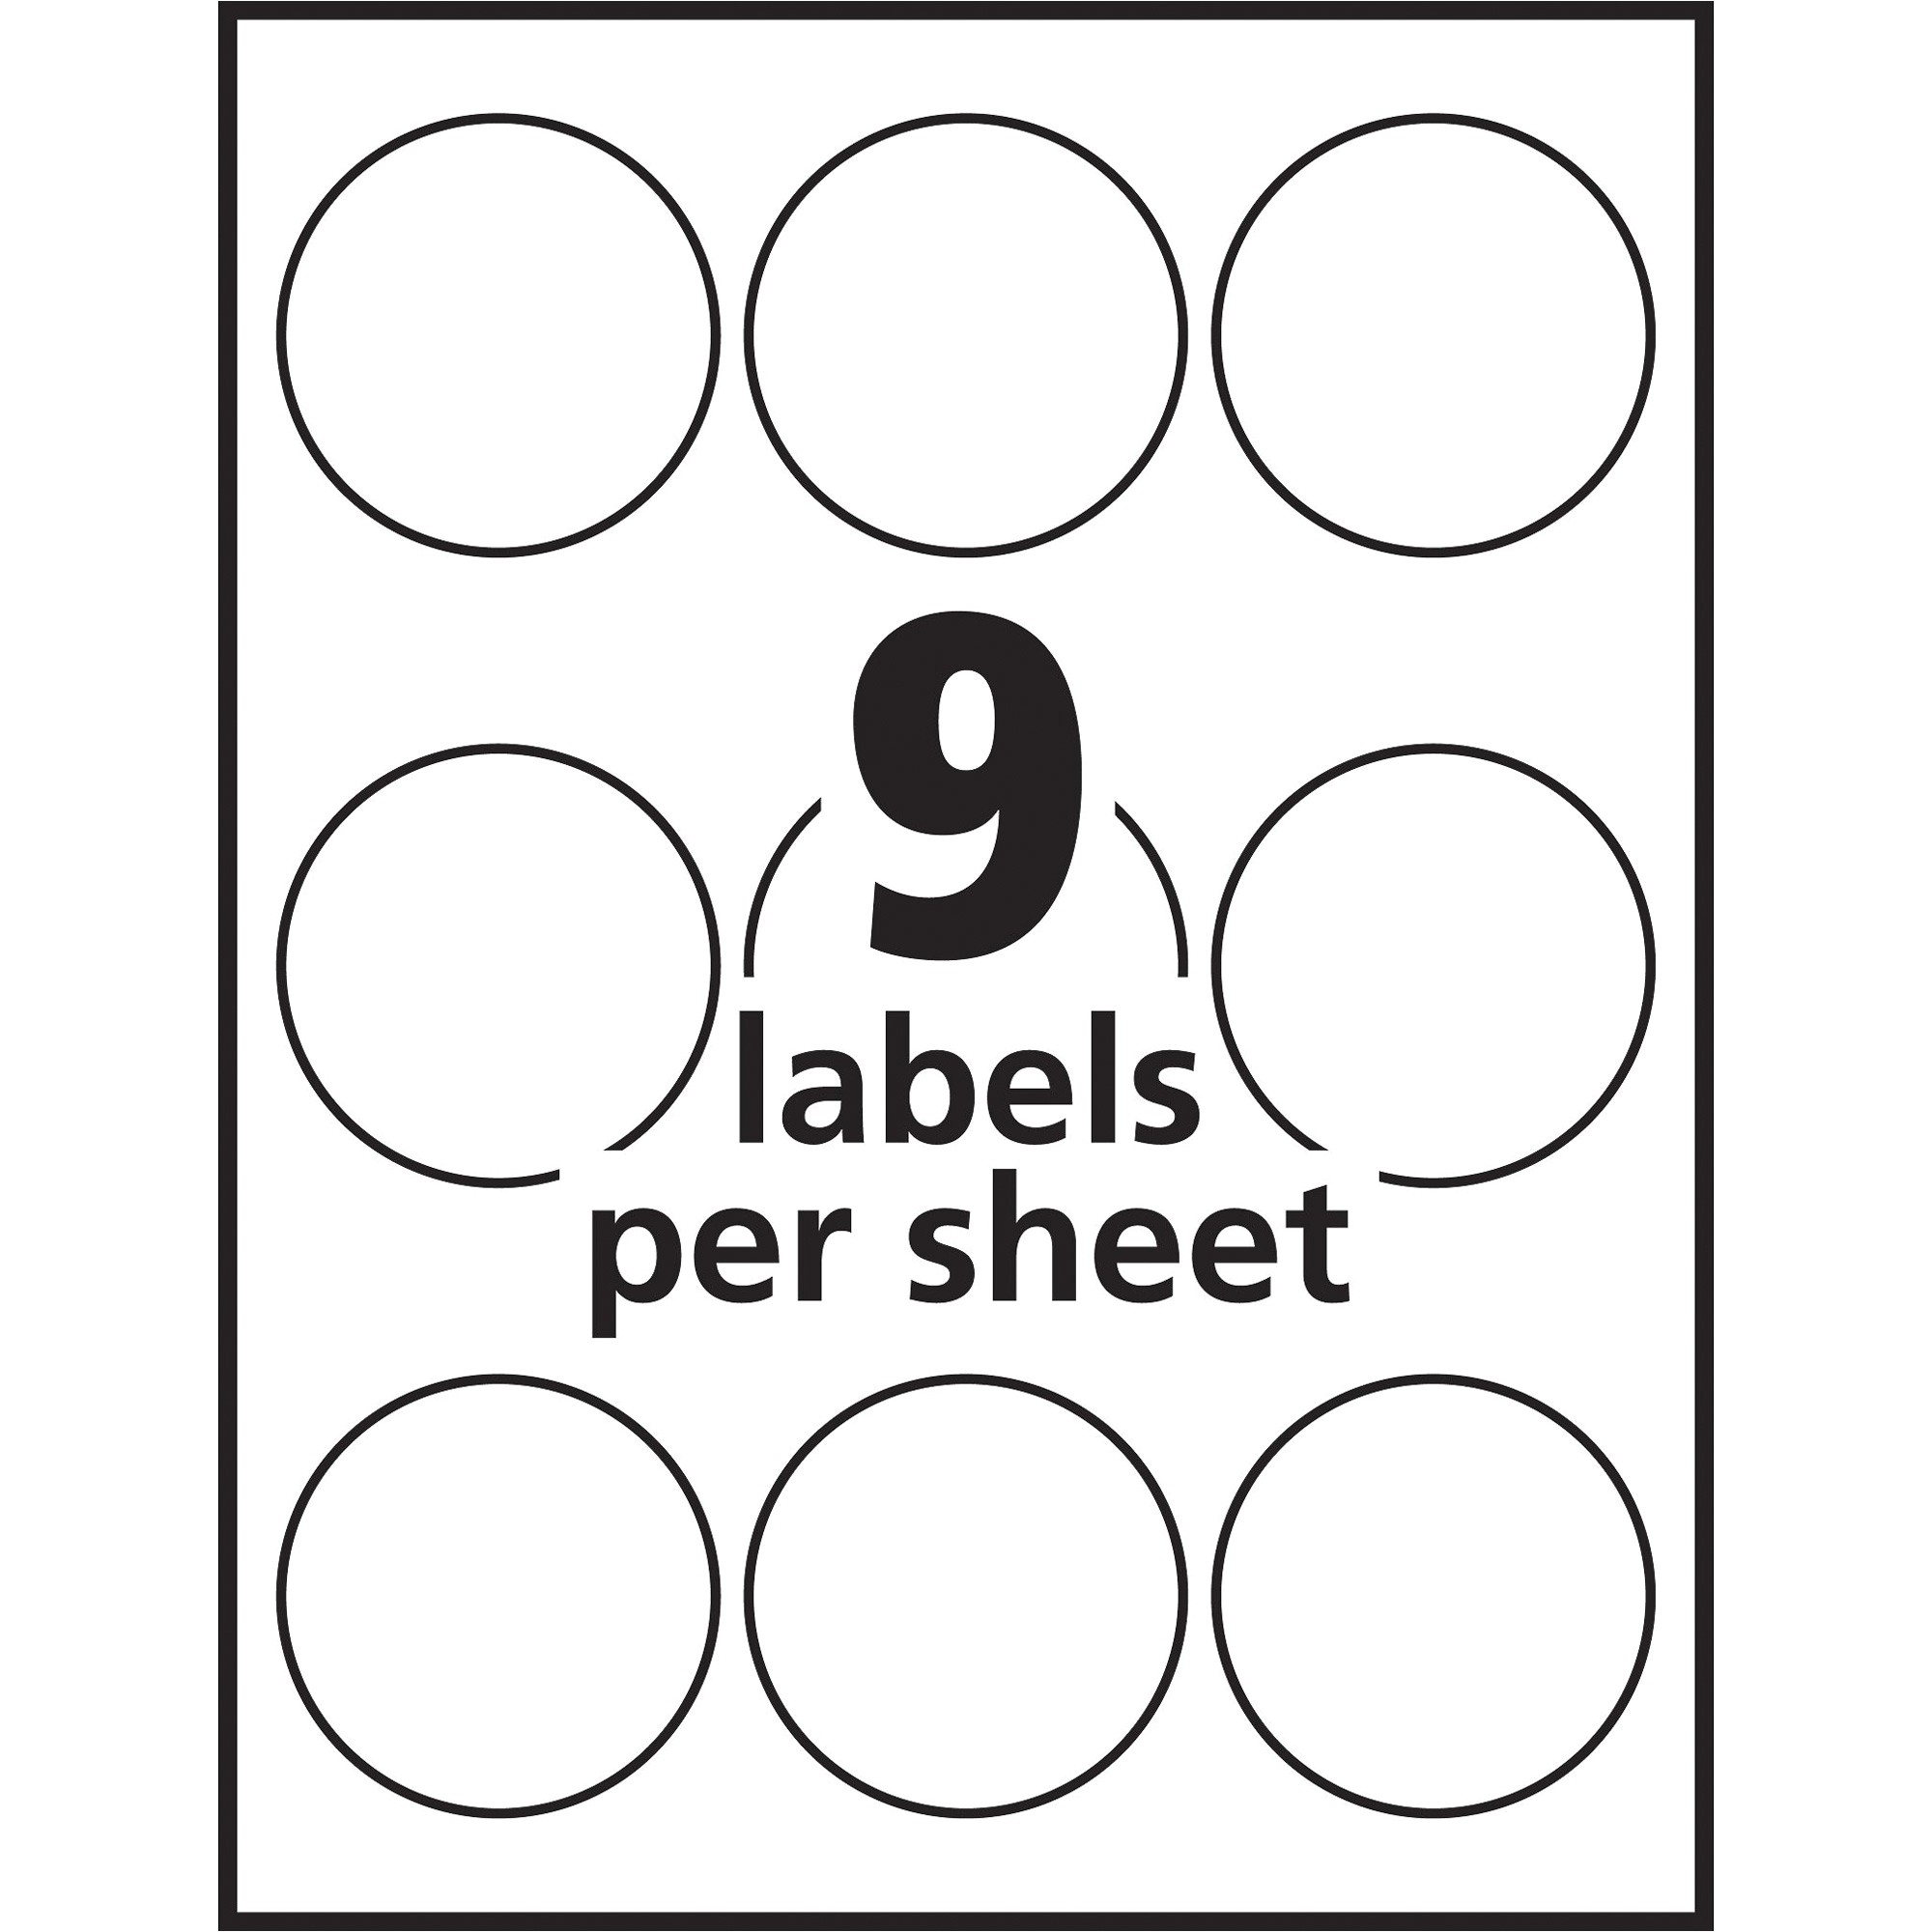 2-inch-round-label-template-awesome-2-inch-round-label-template-label